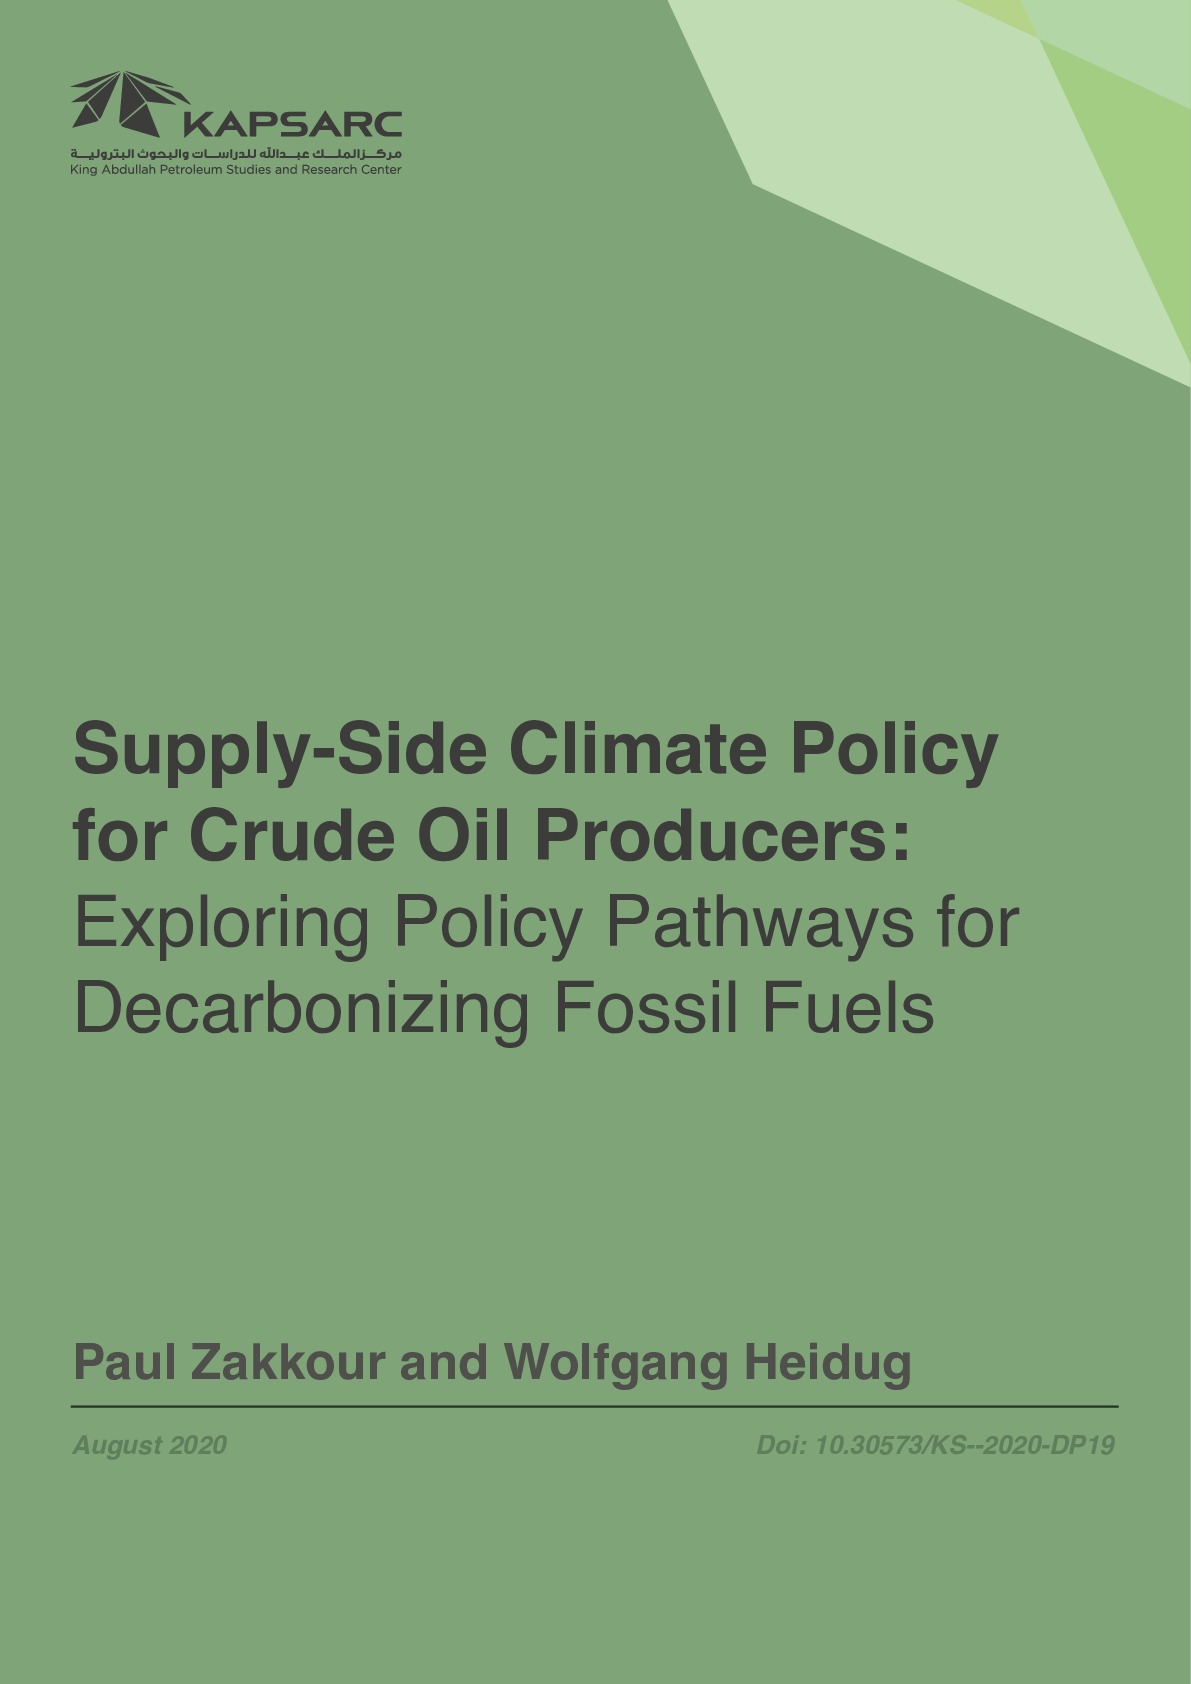 Supply-side Climate Policy for Crude Oil Producers